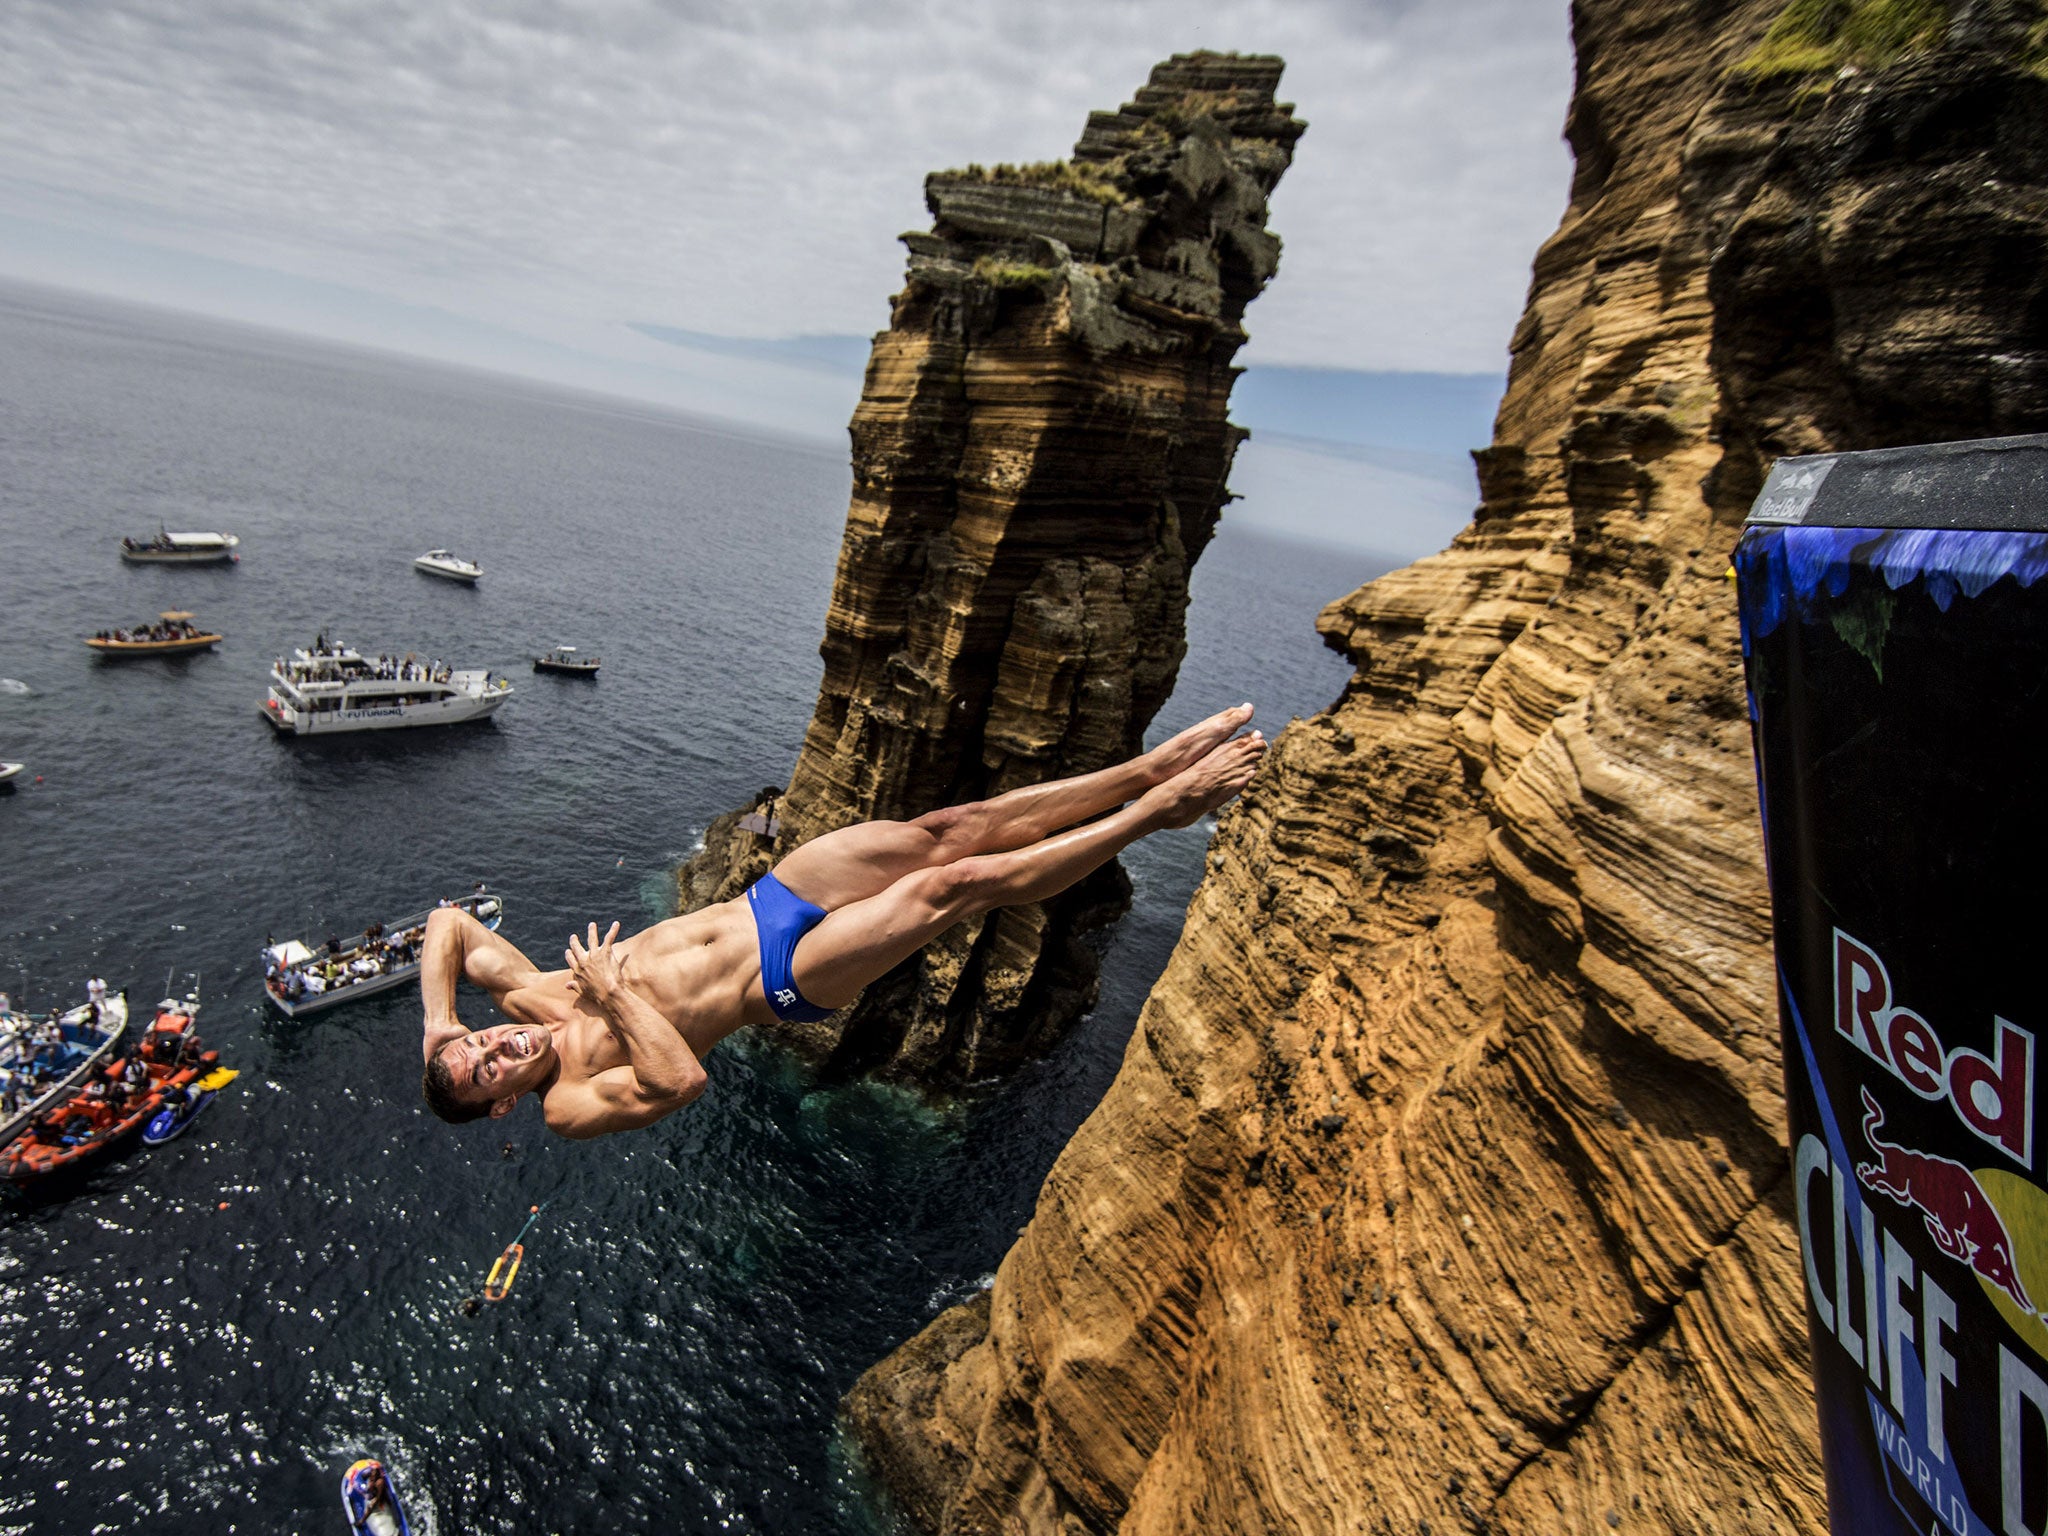 Michal Navratil of the Czech Republic dives from the 27.5 metre rock during the third stop of the Red Bull Cliff Diving World Series at Islet Vila Franca do Campo, Azores, Portugal